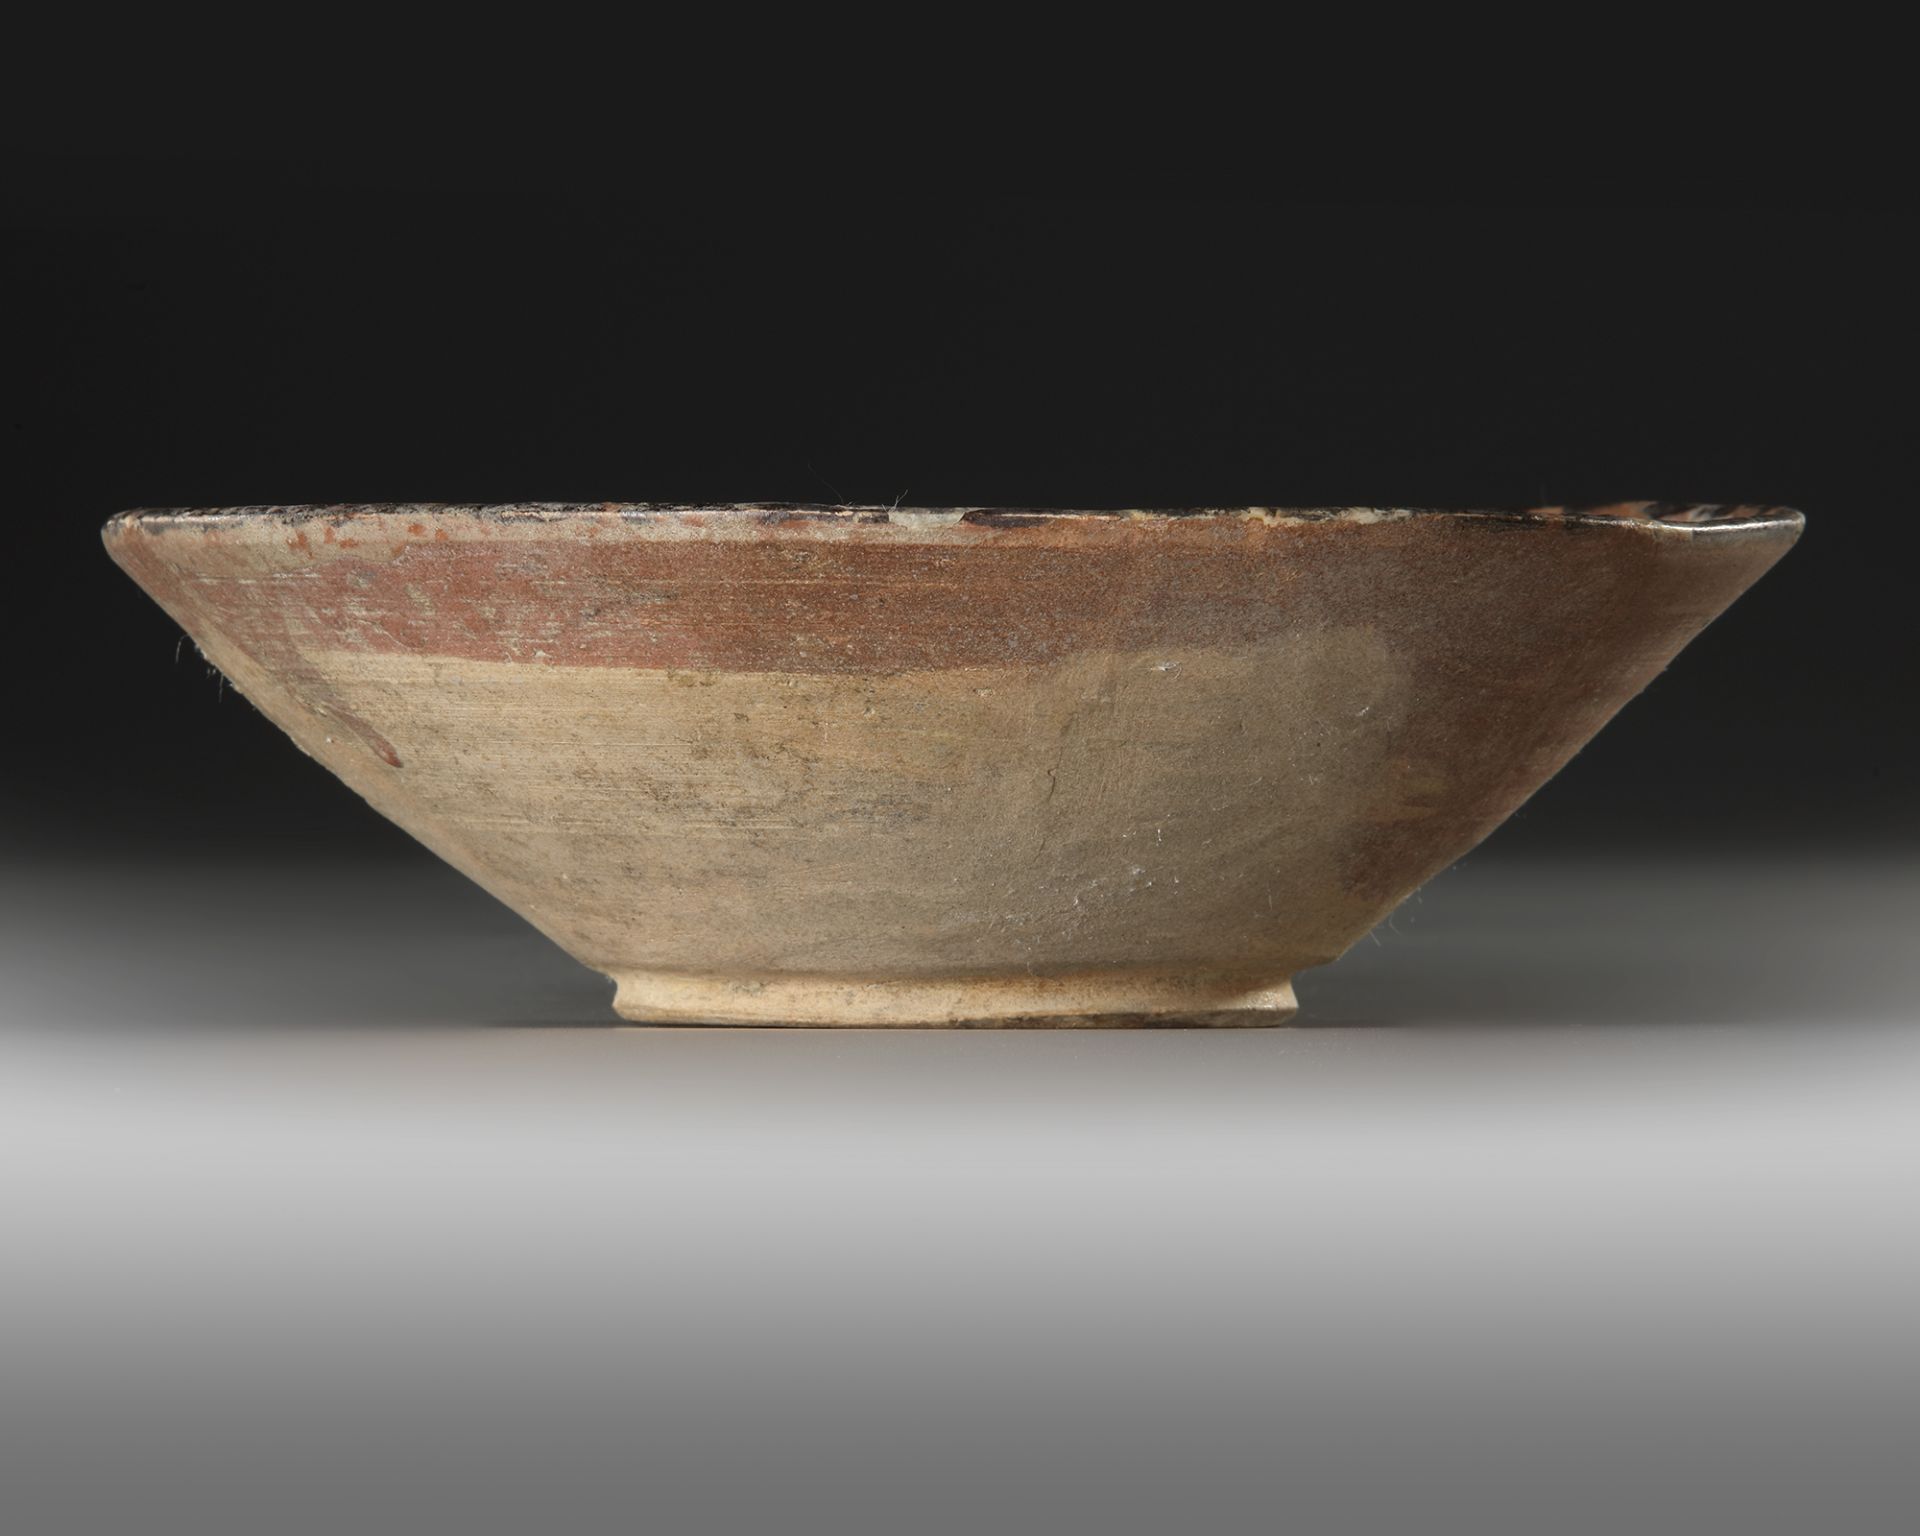 A NISHAPUR CONICAL POTTERY BOWL, PERSIA, 10TH CENTURY - Image 5 of 10